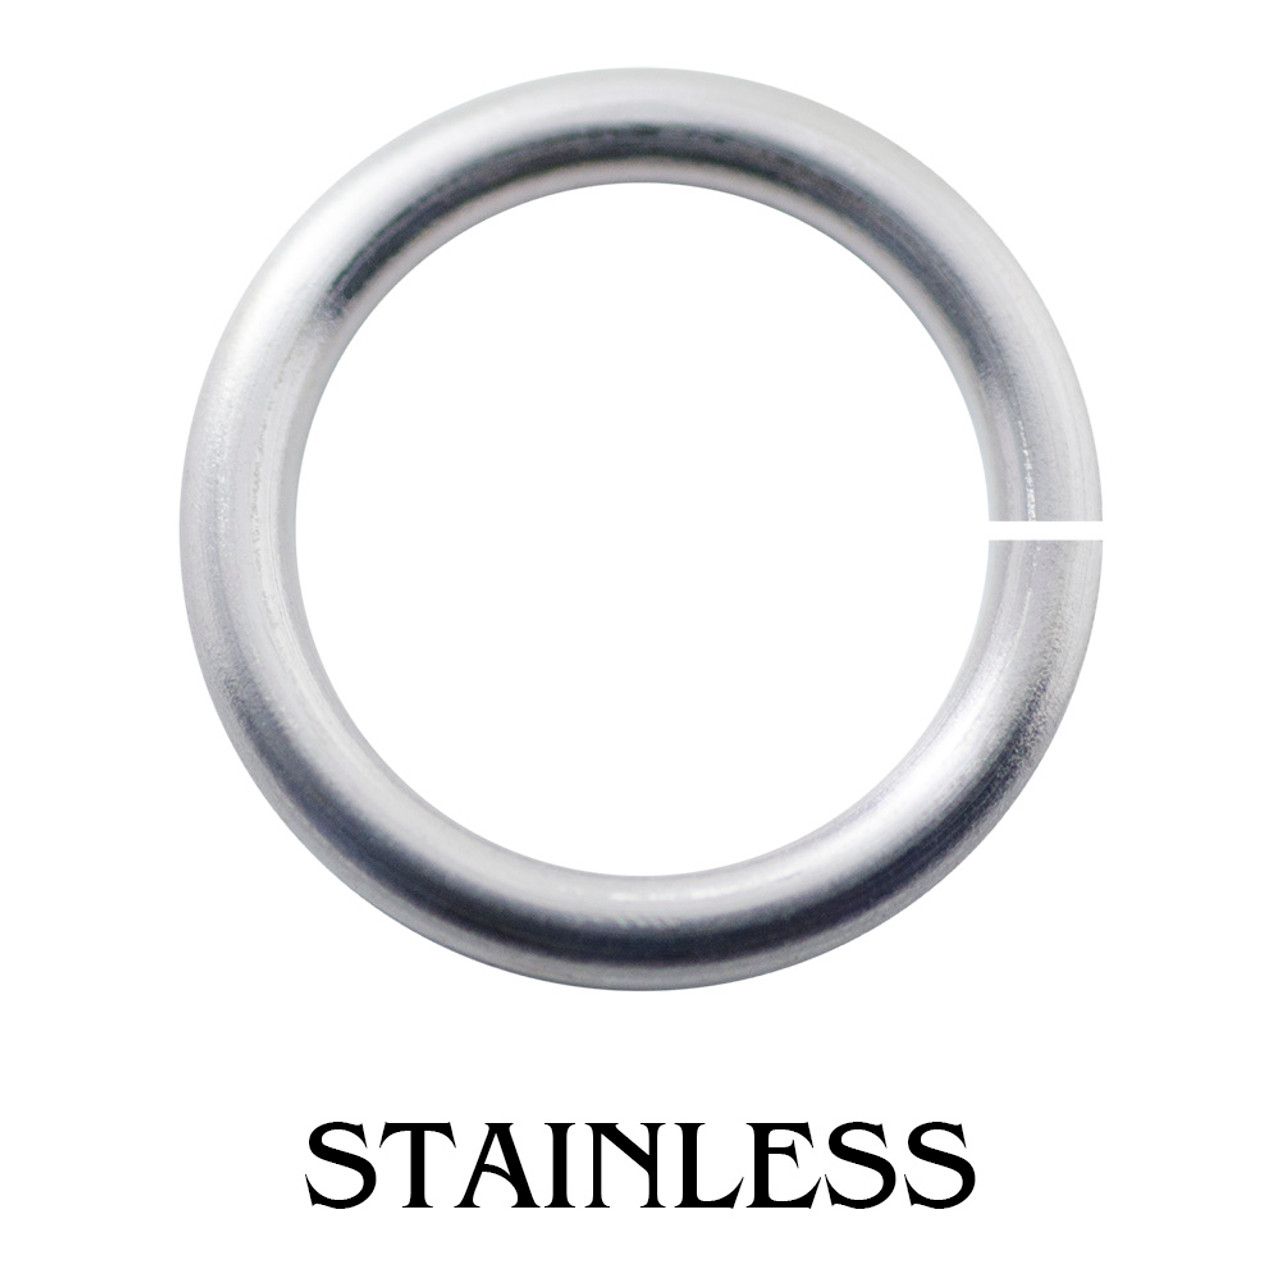 18 AWG Stainless Steel Jump Rings - 1 Ounce